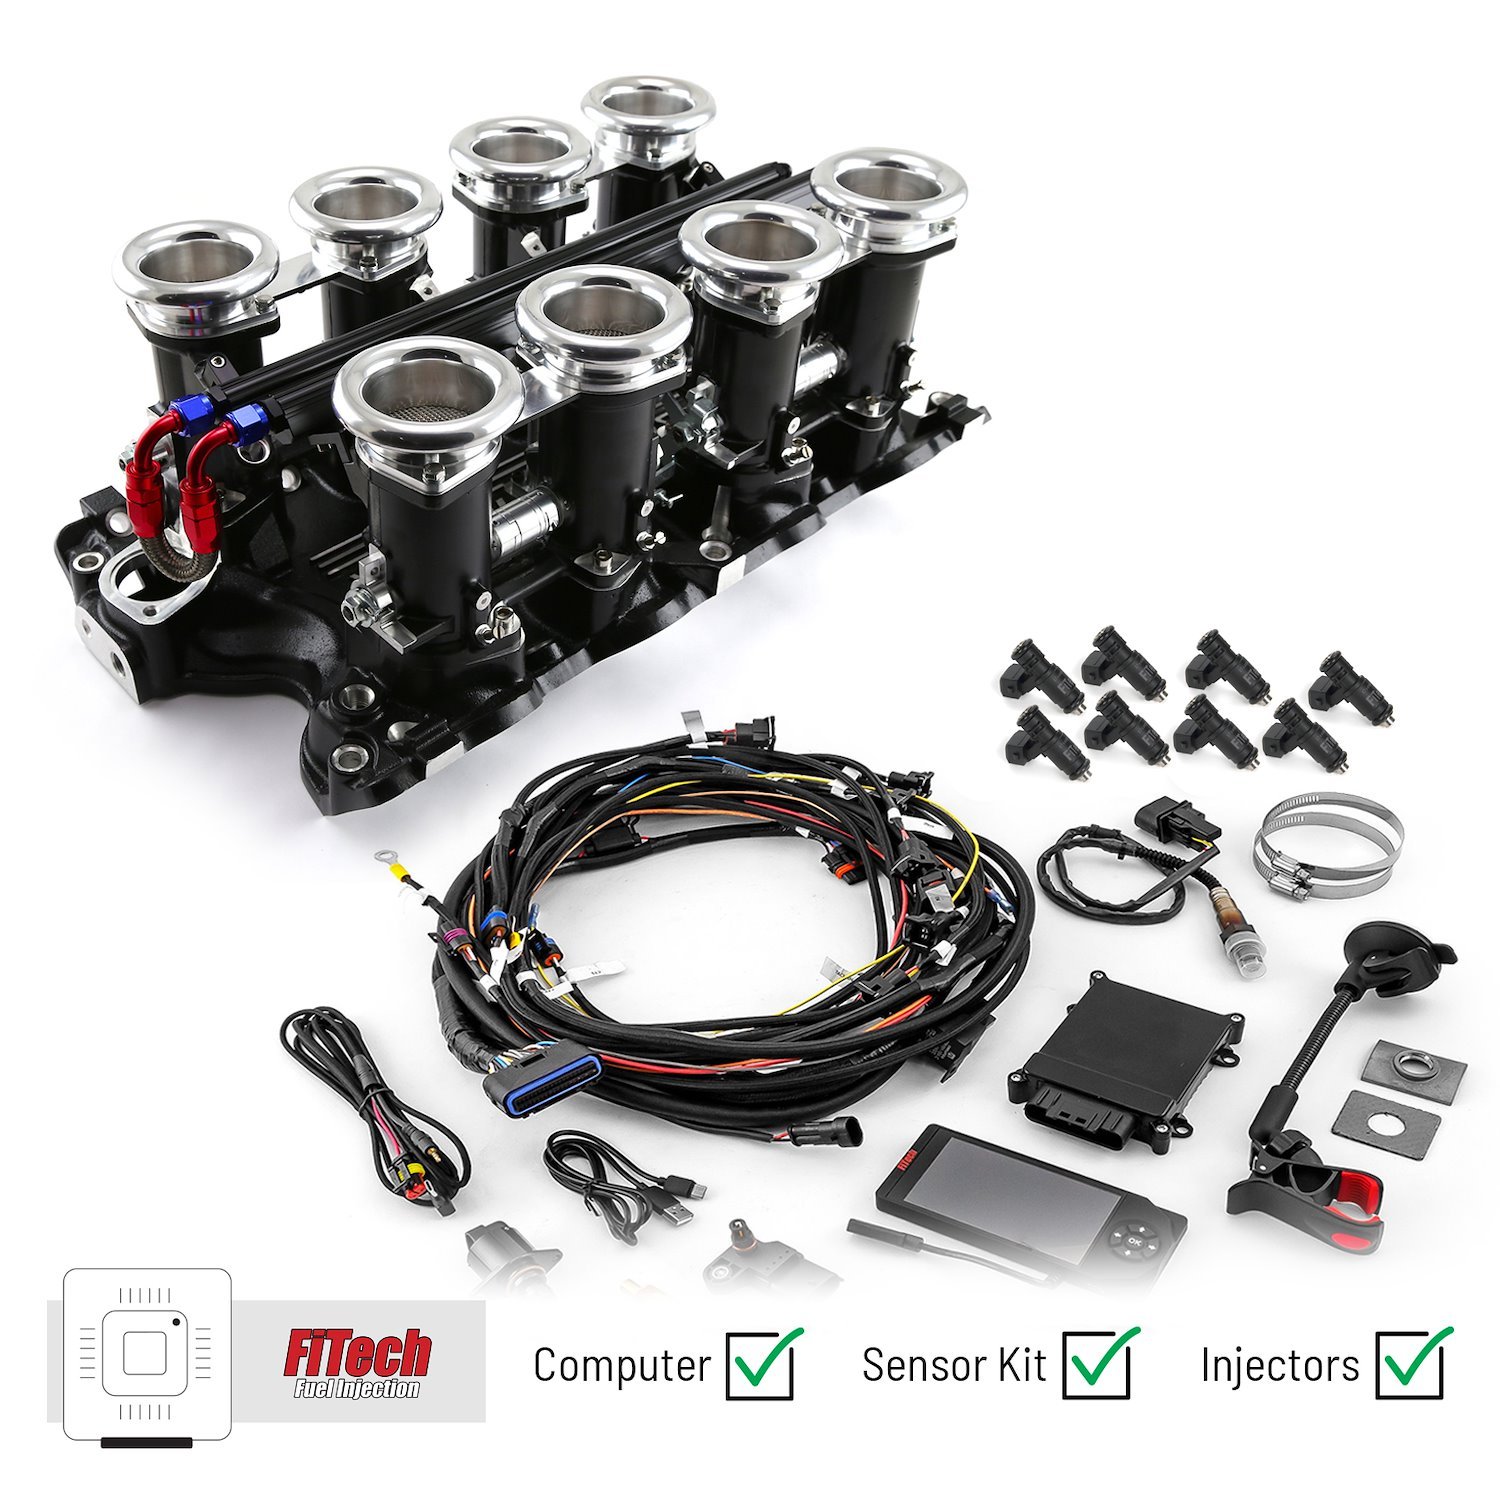 1-135-011-02 Ford BB 460 Downdraft & FiTech Ultra EFI Fuel Injection System [Black]